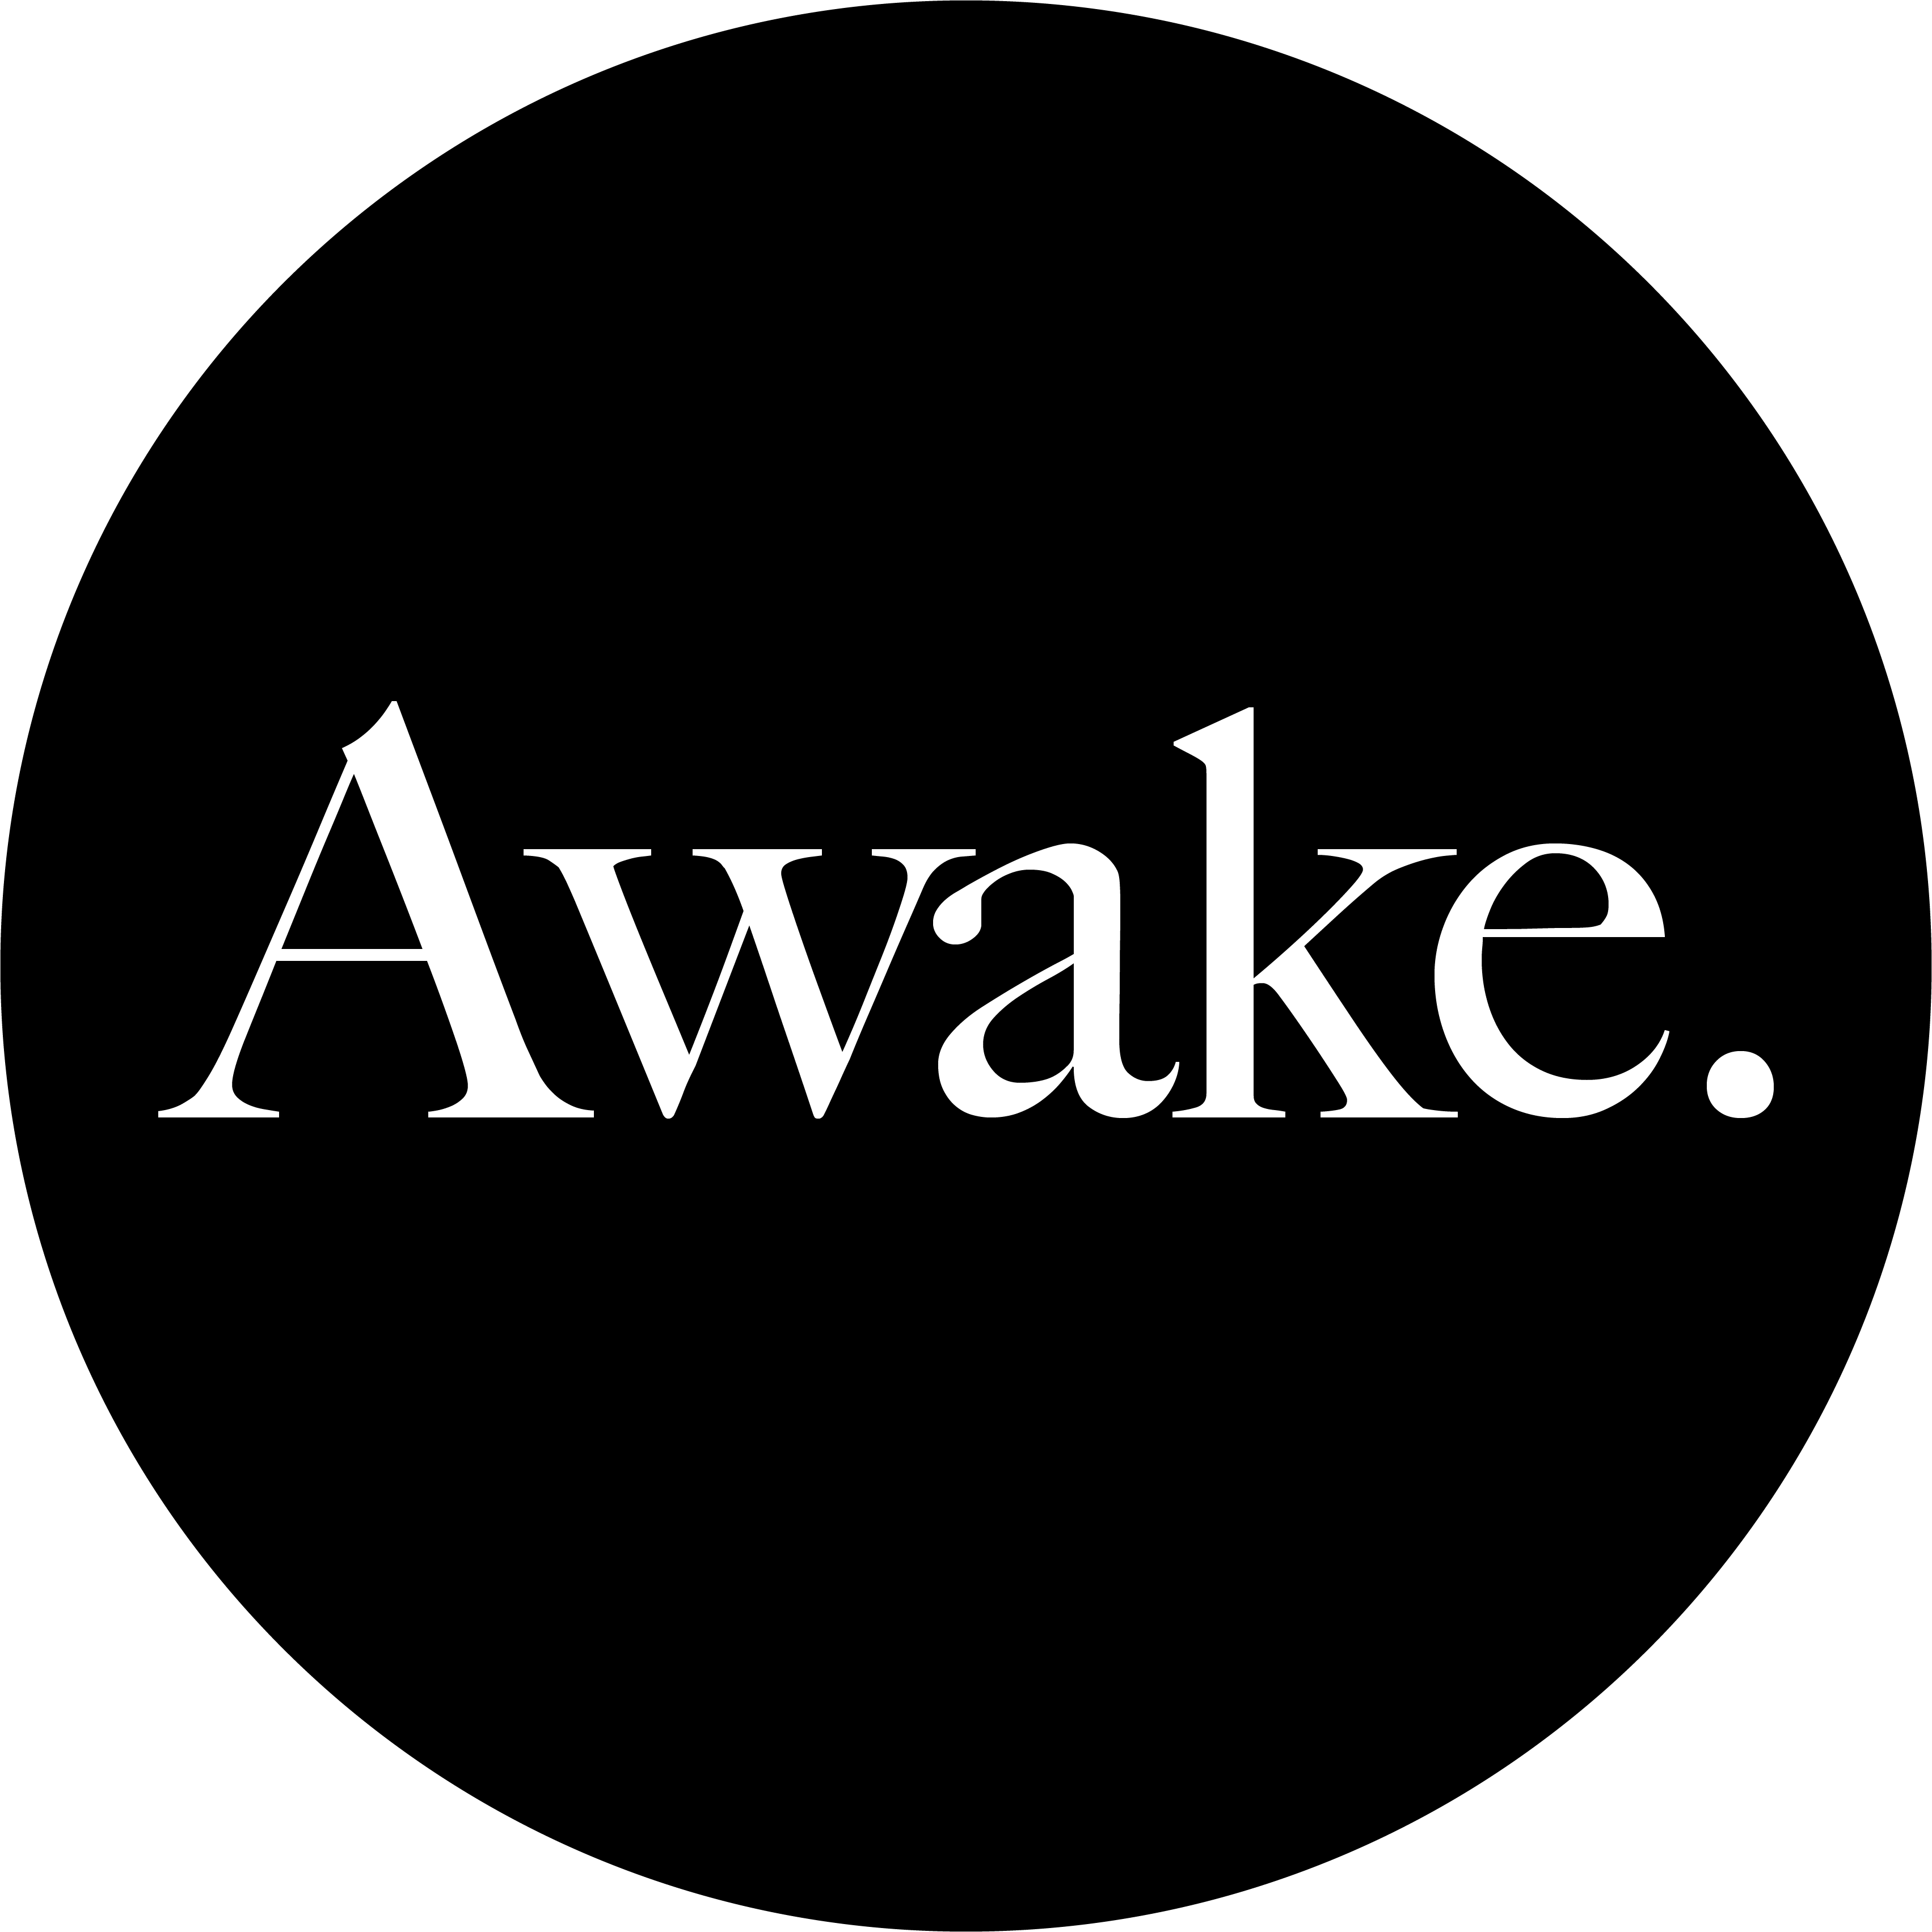 Awake | Digital Design and Branding Agency profile on Qualified.One